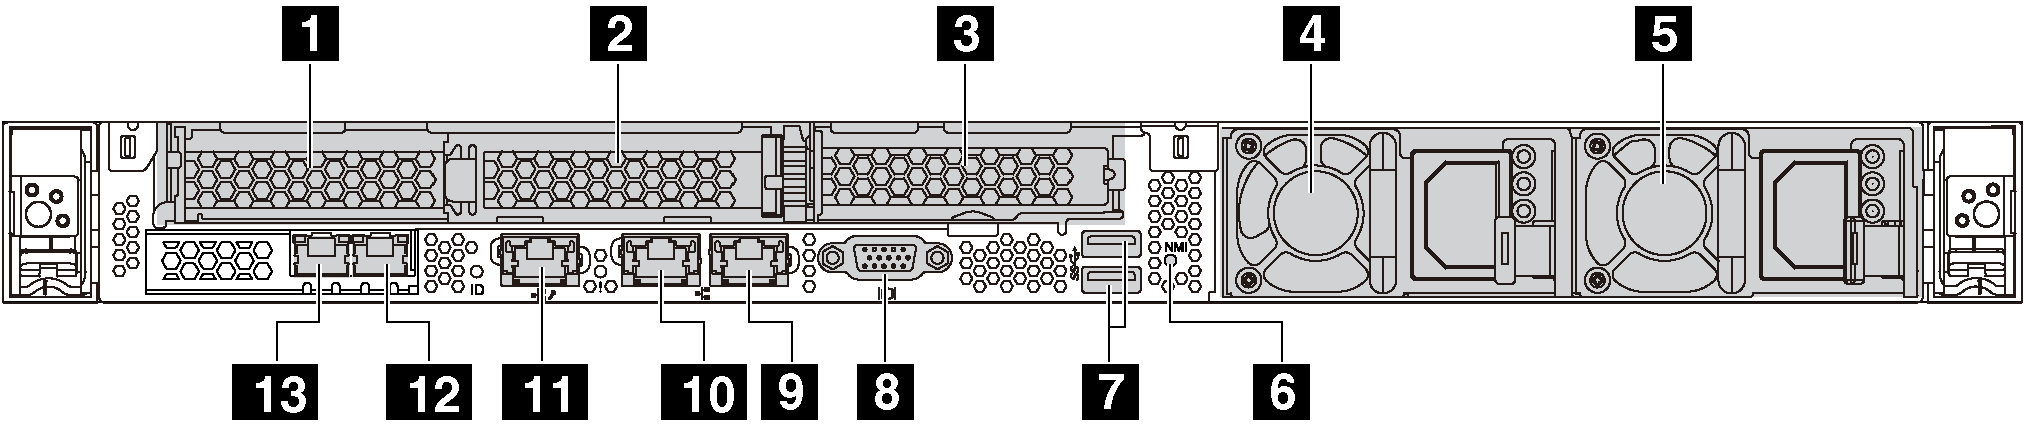 Graphic that depicts the rear view of the server. It includes callouts to identify each of the components.